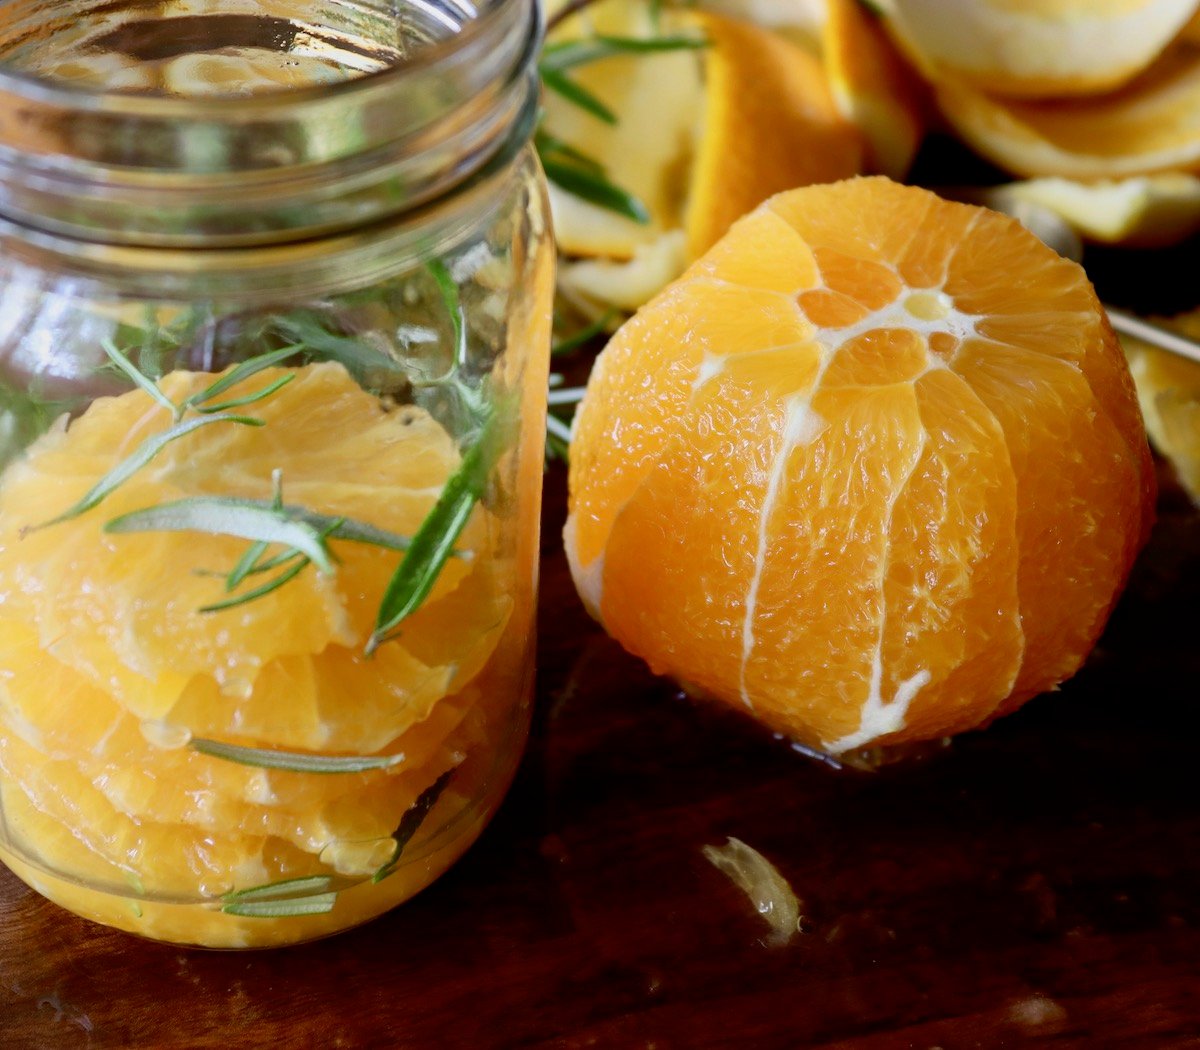 Jar about half filled with orange slices and rosemary with peeled orange next to it.